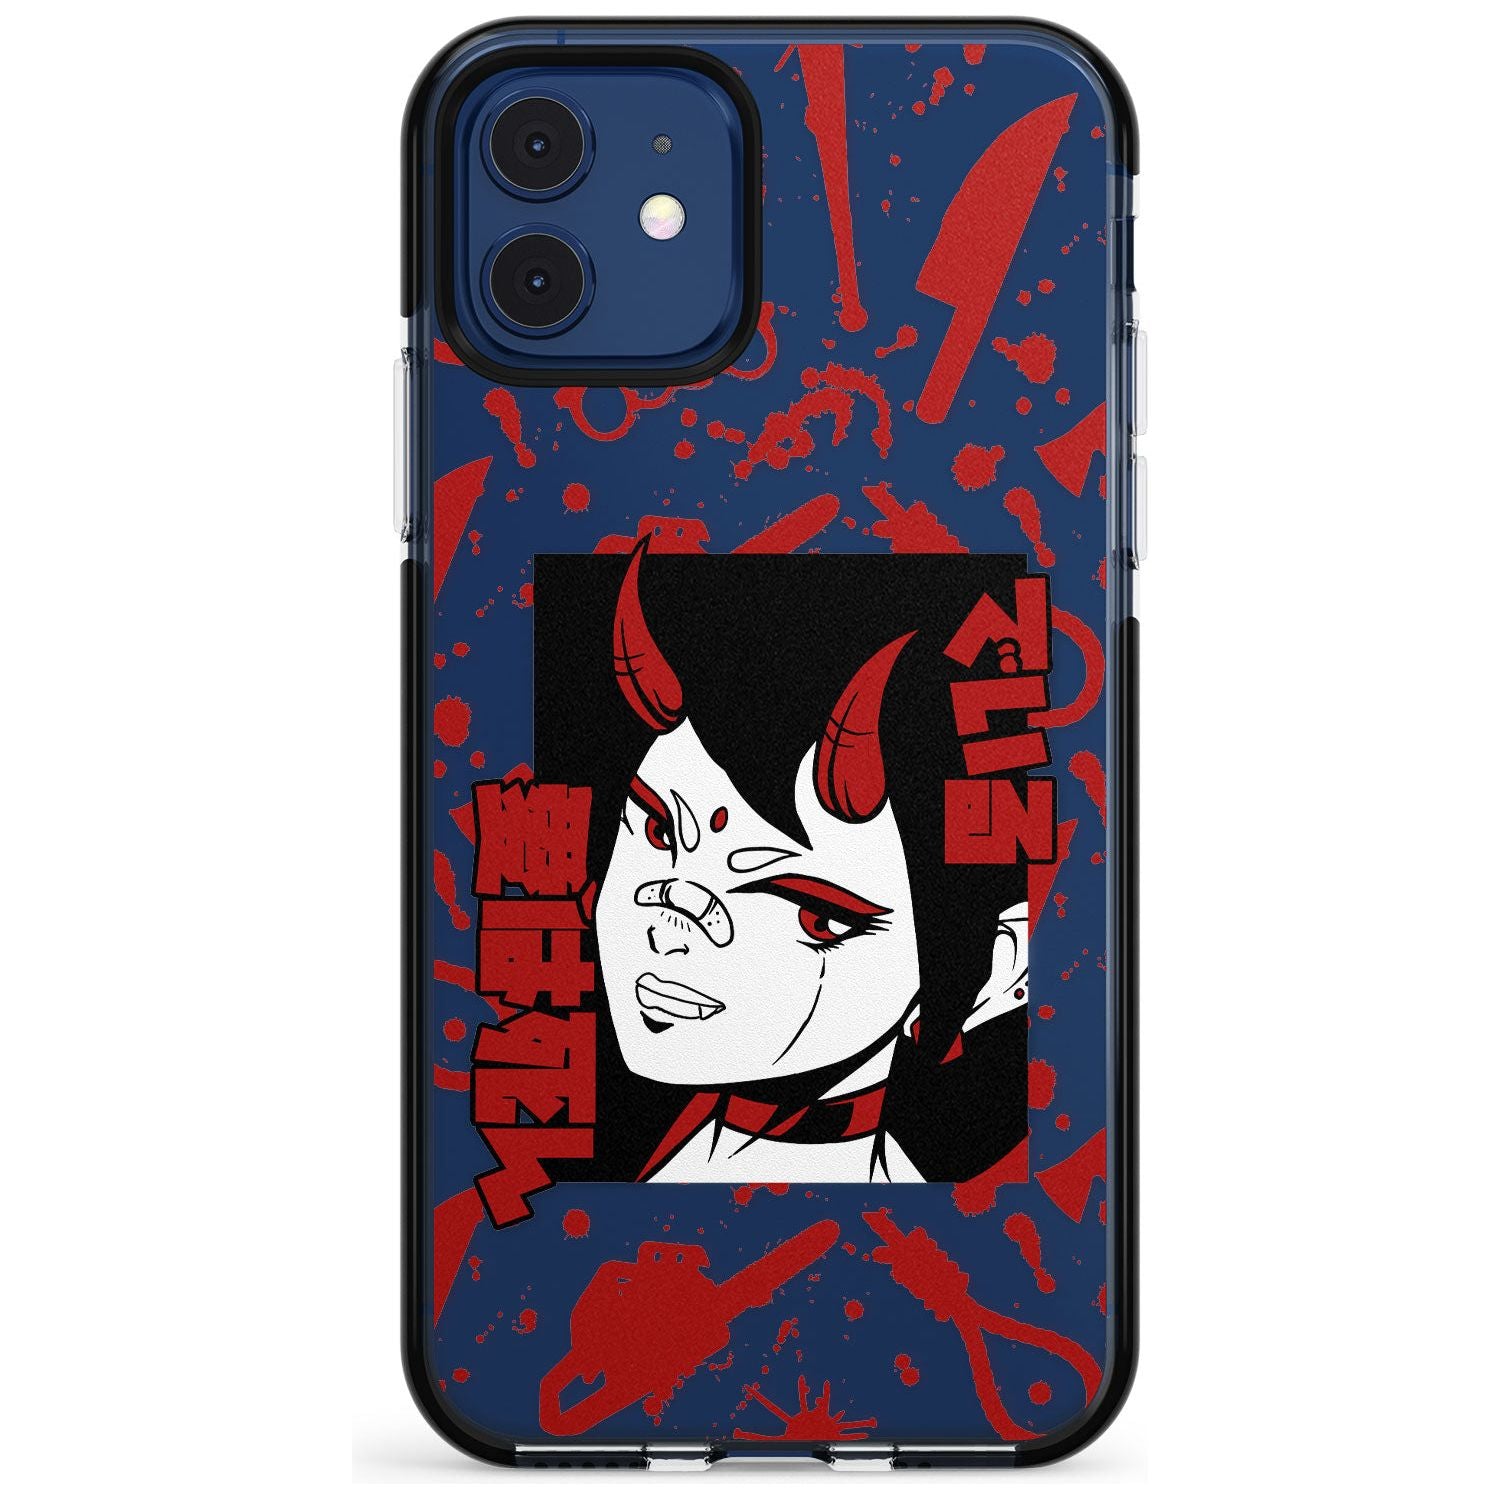 She's a Devil Black Impact Phone Case for iPhone 11 Pro Max